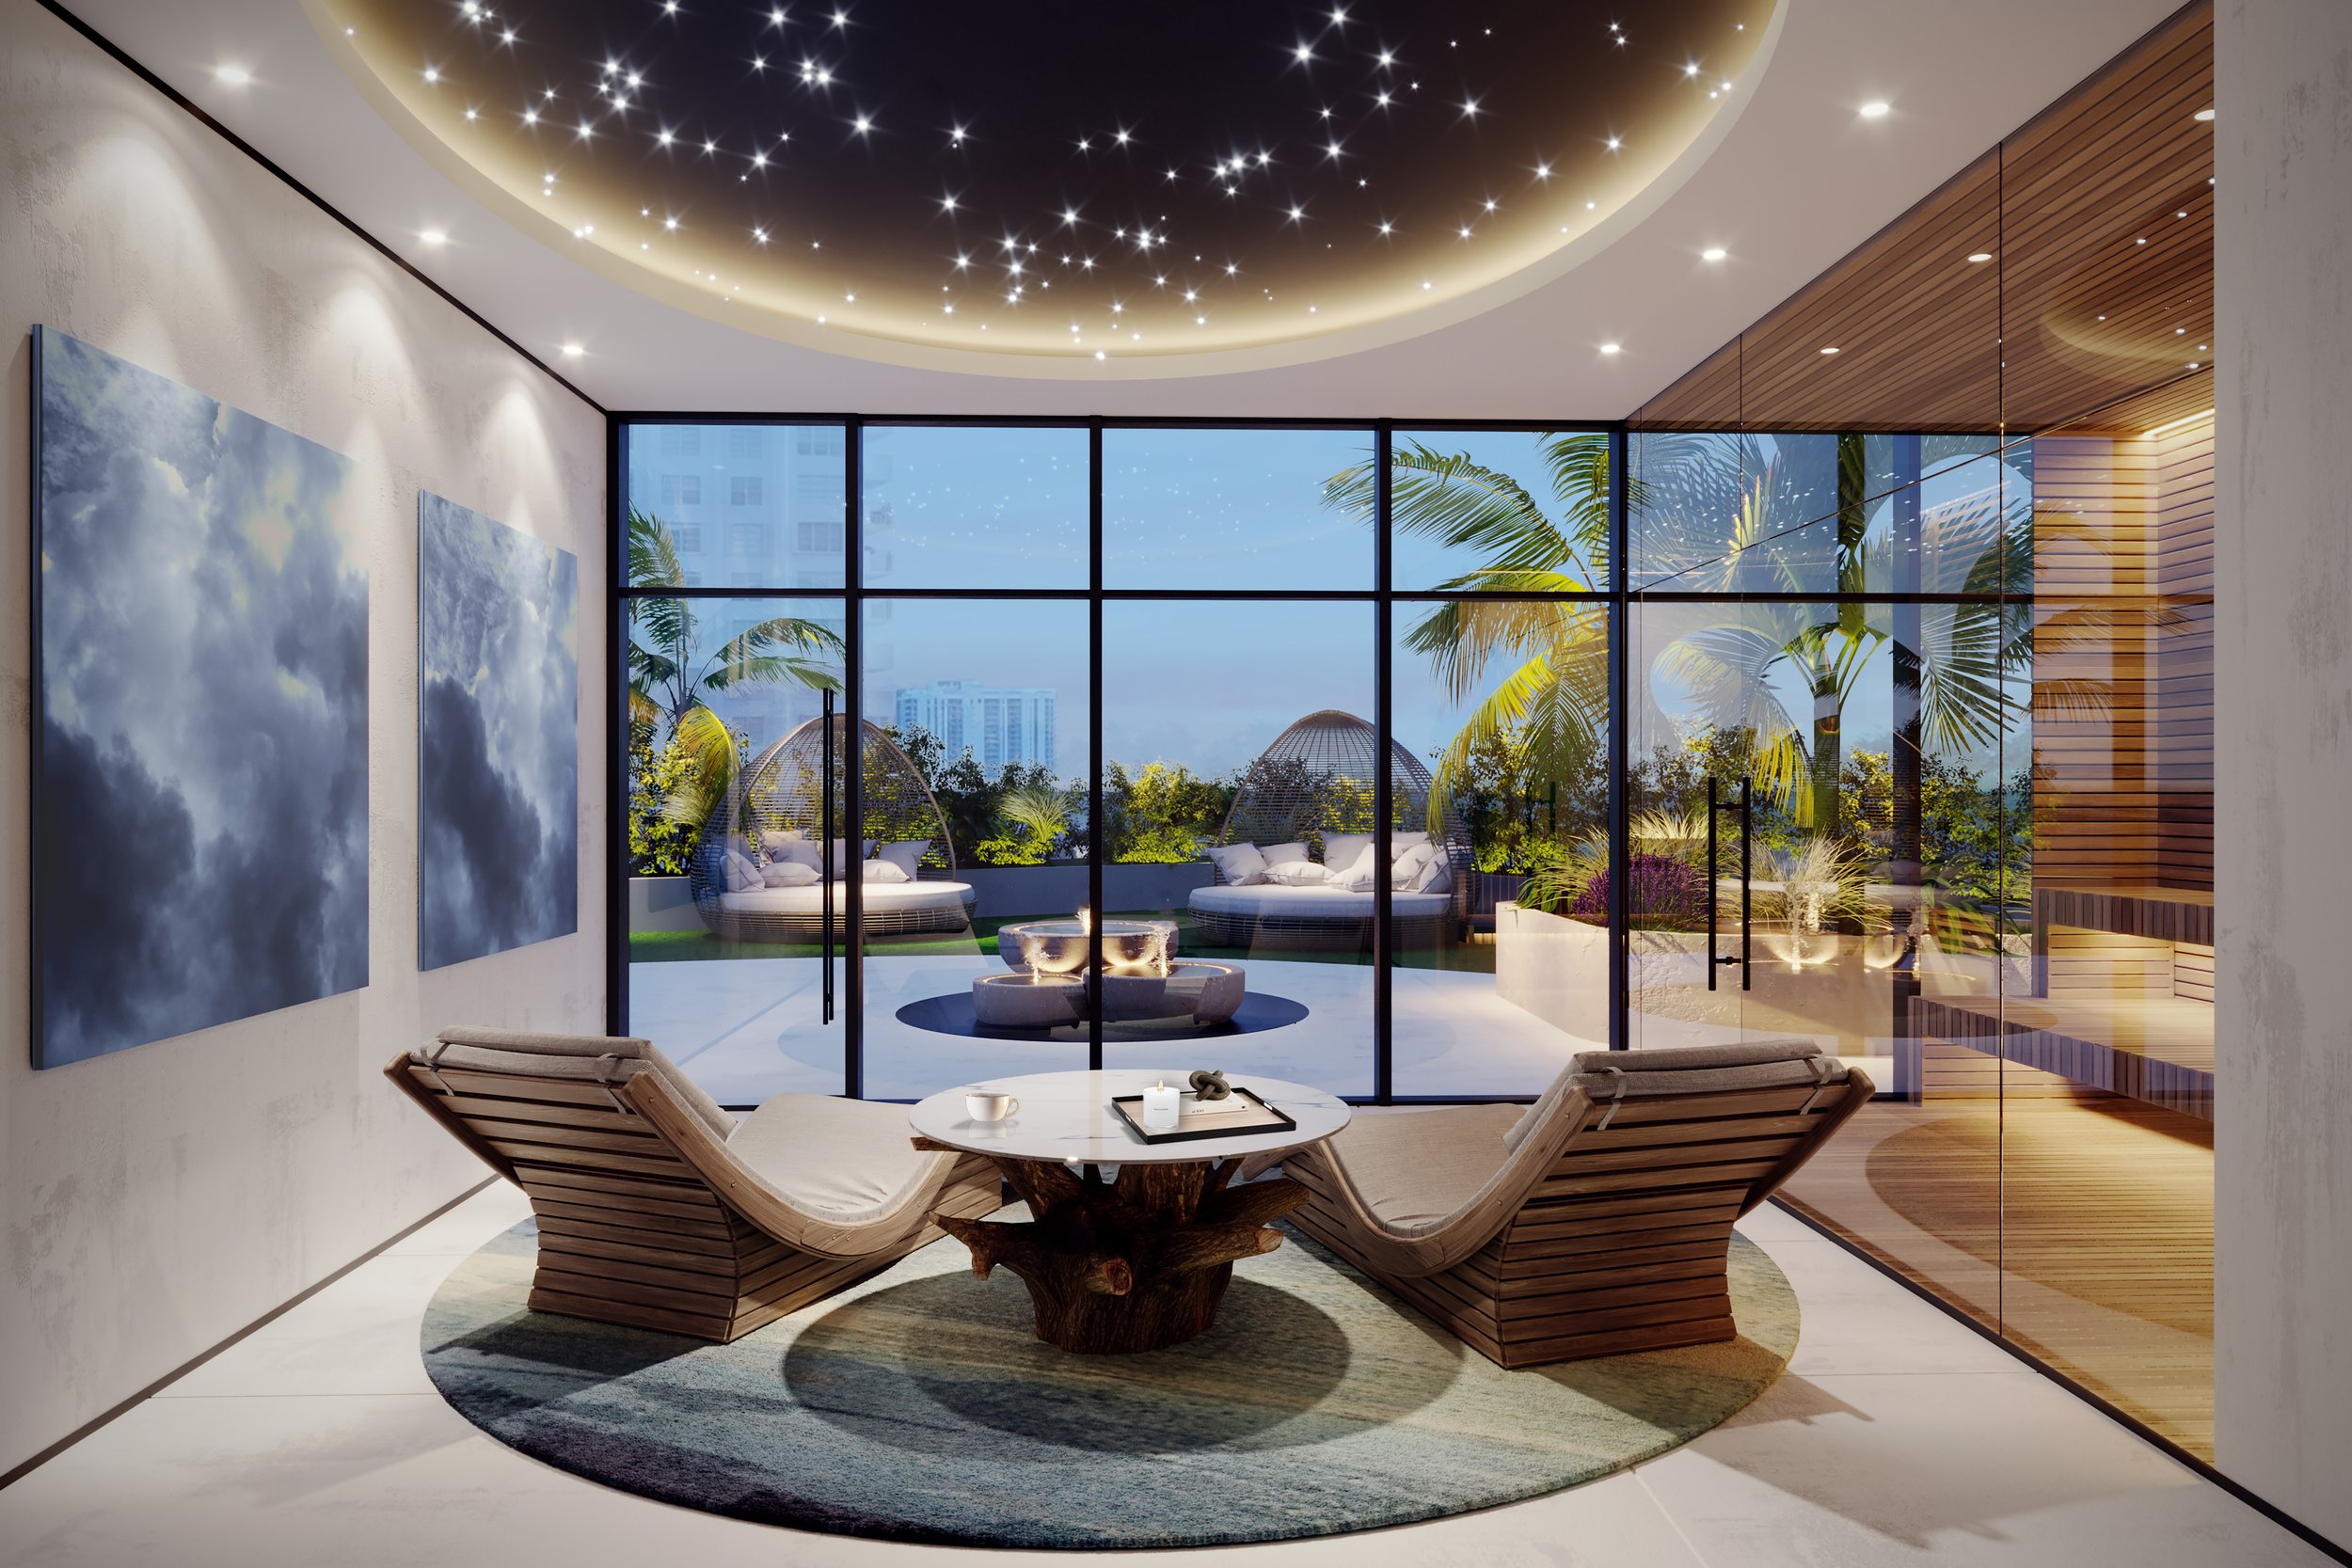 Tal Aventura Reveals Interior And Amenity Renderings Imagined By IDEA Architects and IDDI 28.jpg